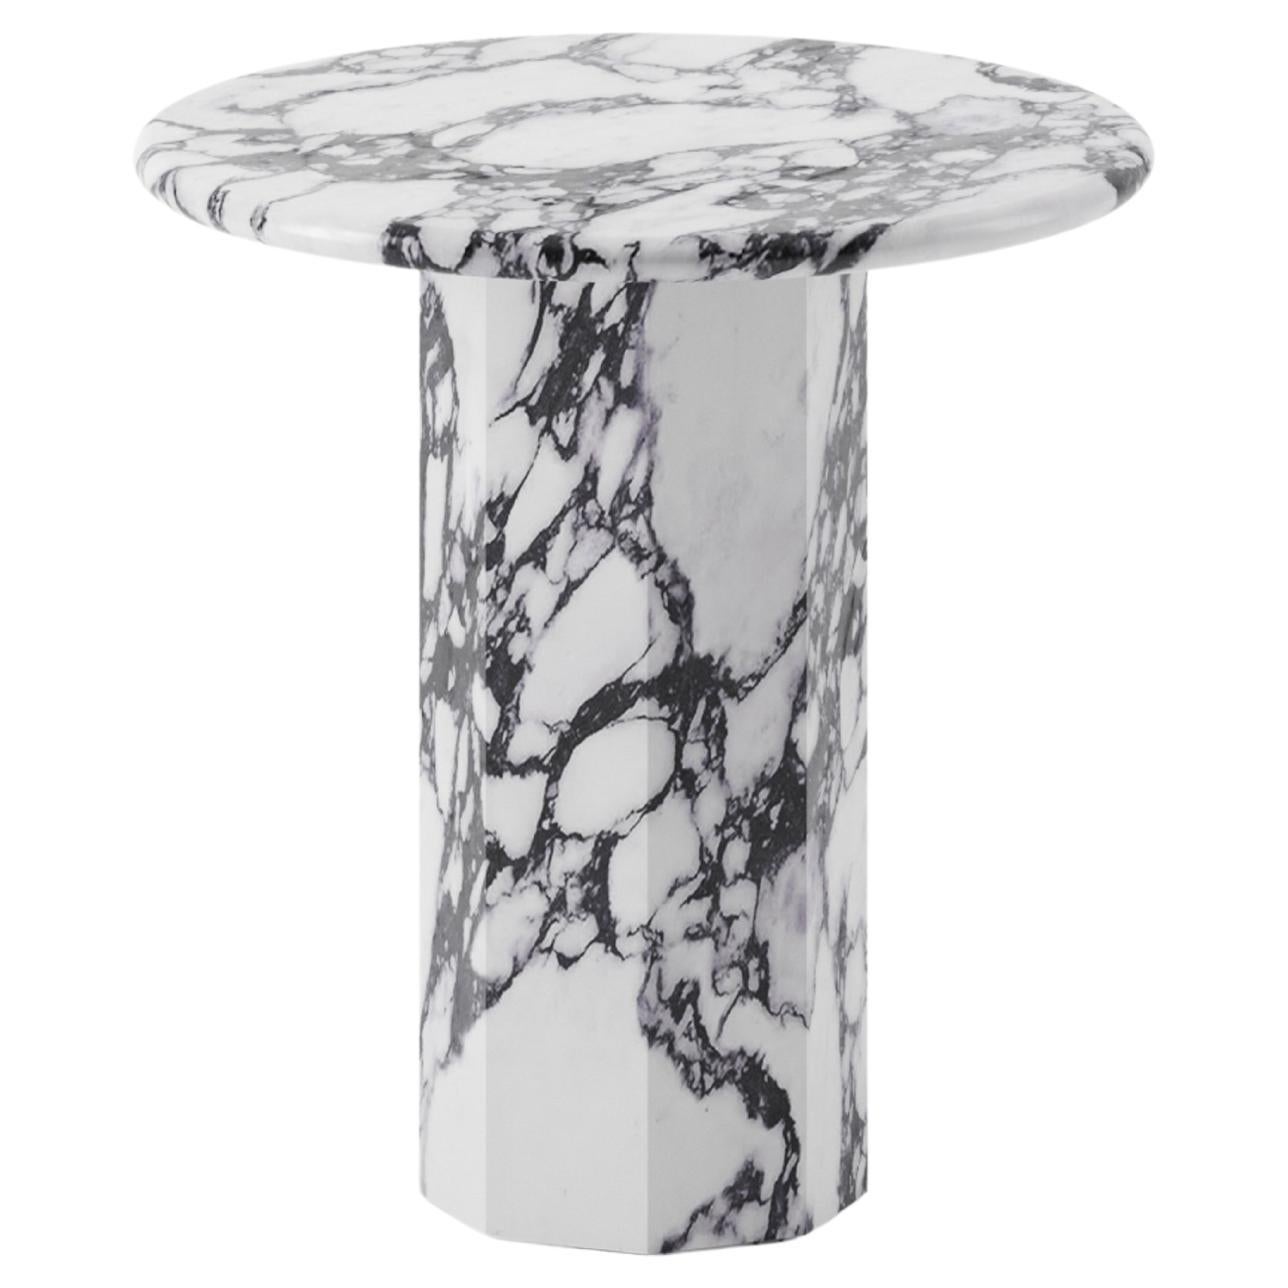 Ashby Round Side Table Handcrafted in Calacatta Viola Marble